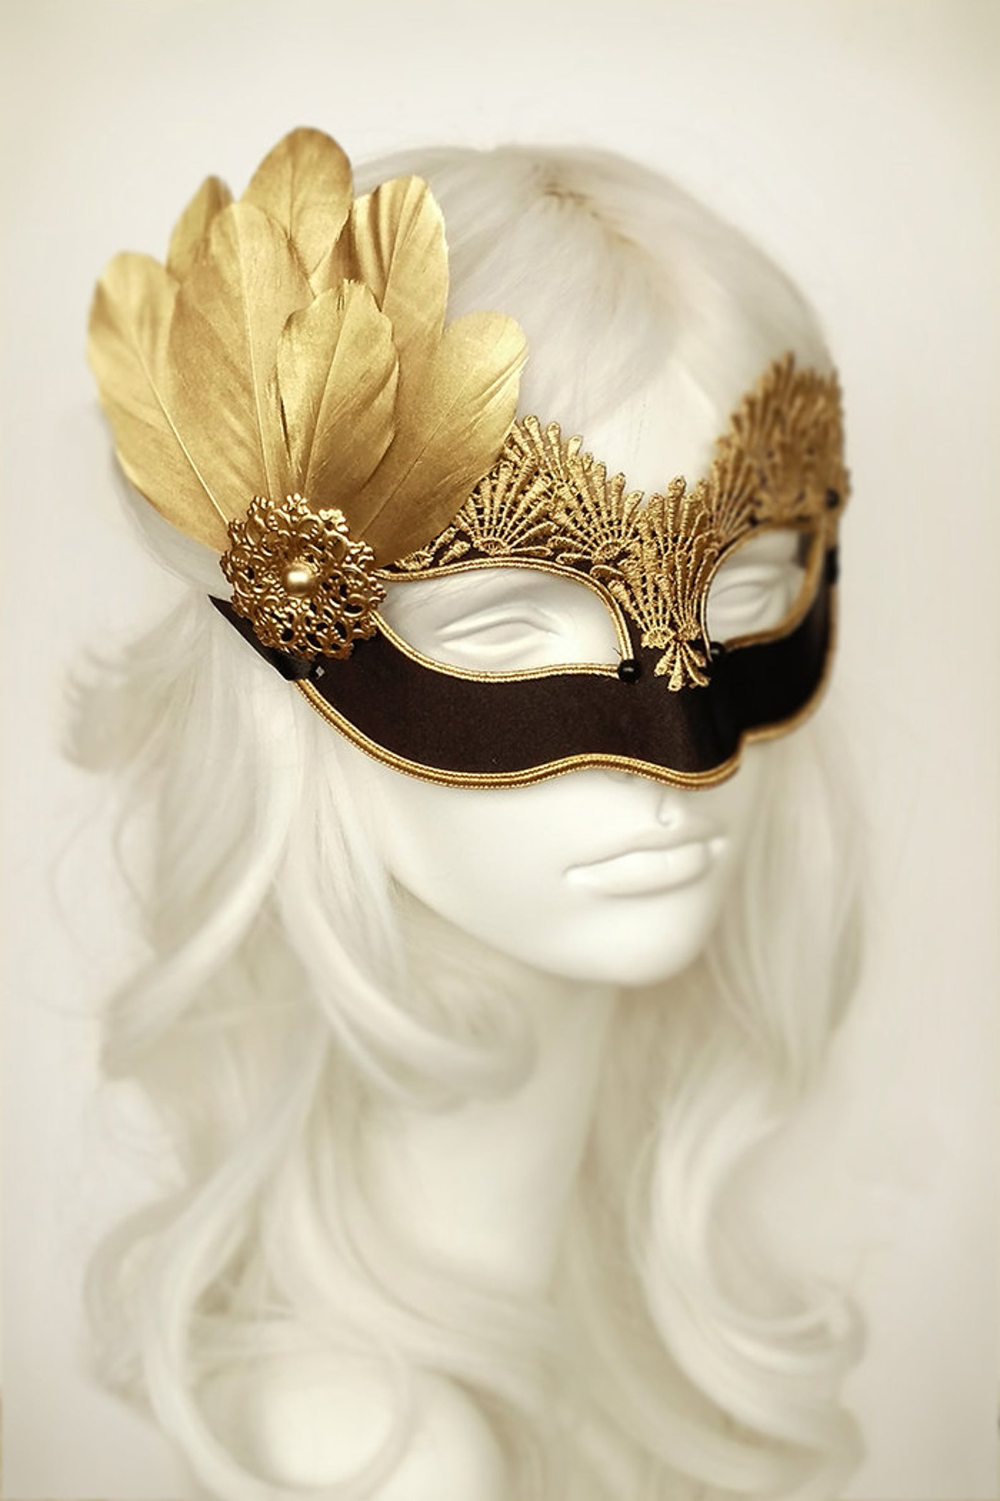 Black & Gold Lace Masquerade Mask - Venetian Style Halloween Mask With Feathers - For Masquerade Ball, Prom, Costume Party, Wedding - Black & Gold Lace Masquerade Mask - Venetian Style Halloween Mask With Feathers - For Masquerade Ball, Prom, Costume Party, Wedding -   15 beauty Mask anime ideas